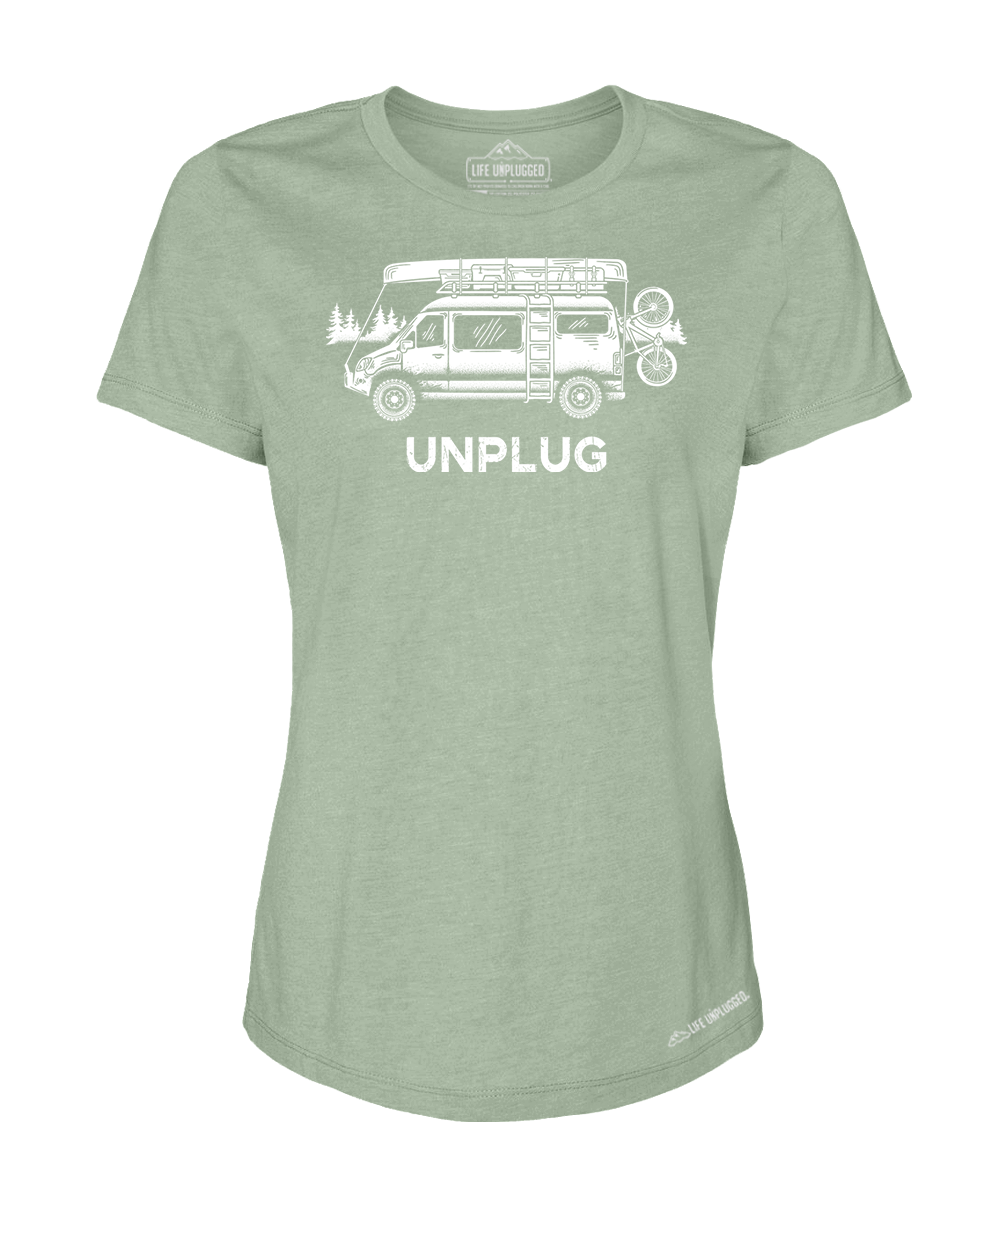 Van Life Premium Women's Relaxed Fit Polyblend T-Shirt - Life Unplugged